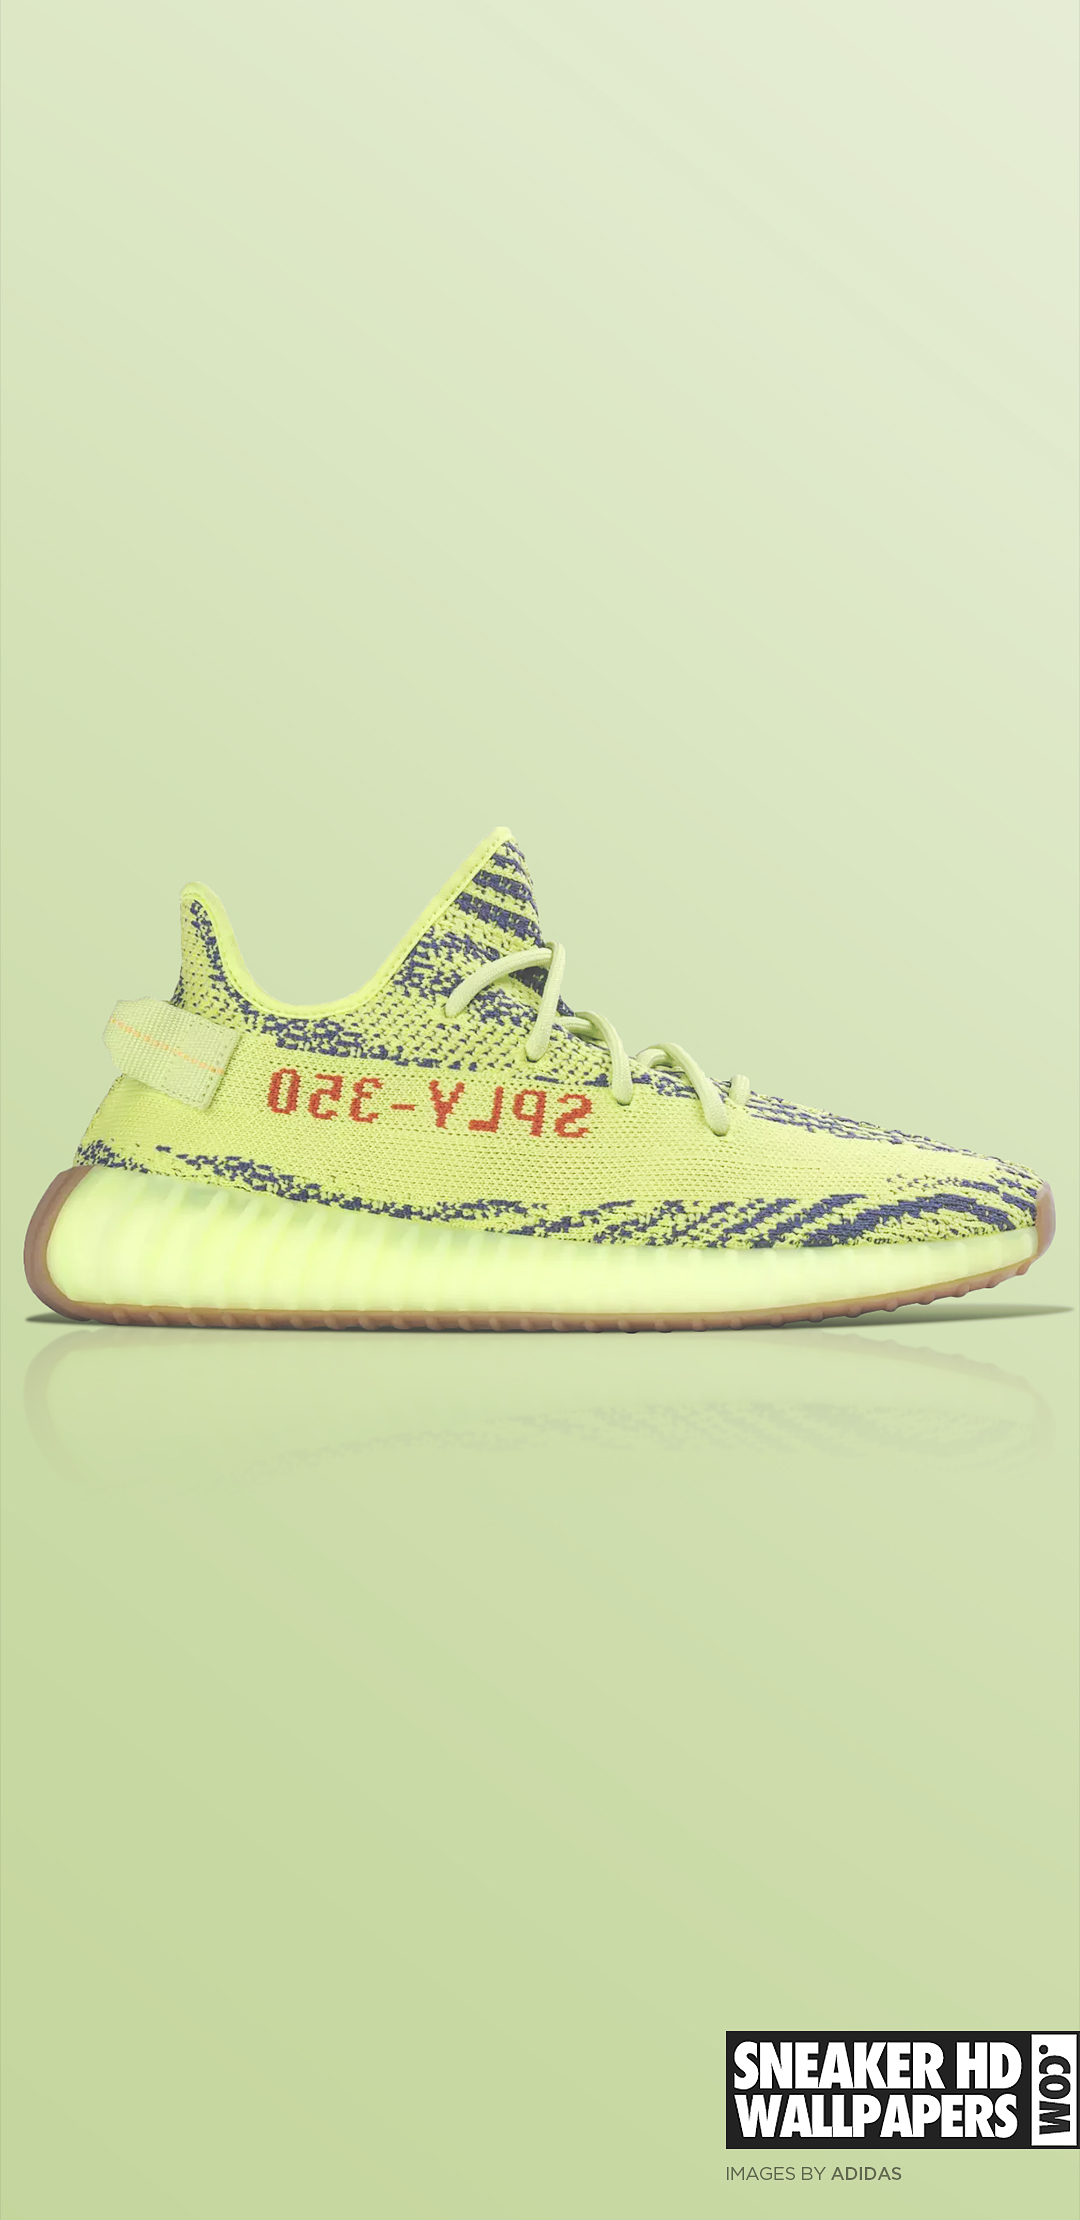 SneakerHDWallpapers.com – Your favorite sneakers in 4K, Retina, and HD wallpaper resolutions! » Blog Archive Adidas Yeezy Boost 350 V2 "Semi Frozen Yellow" wallpaper! - SneakerHDWallpapers.com - Your favorite sneakers in